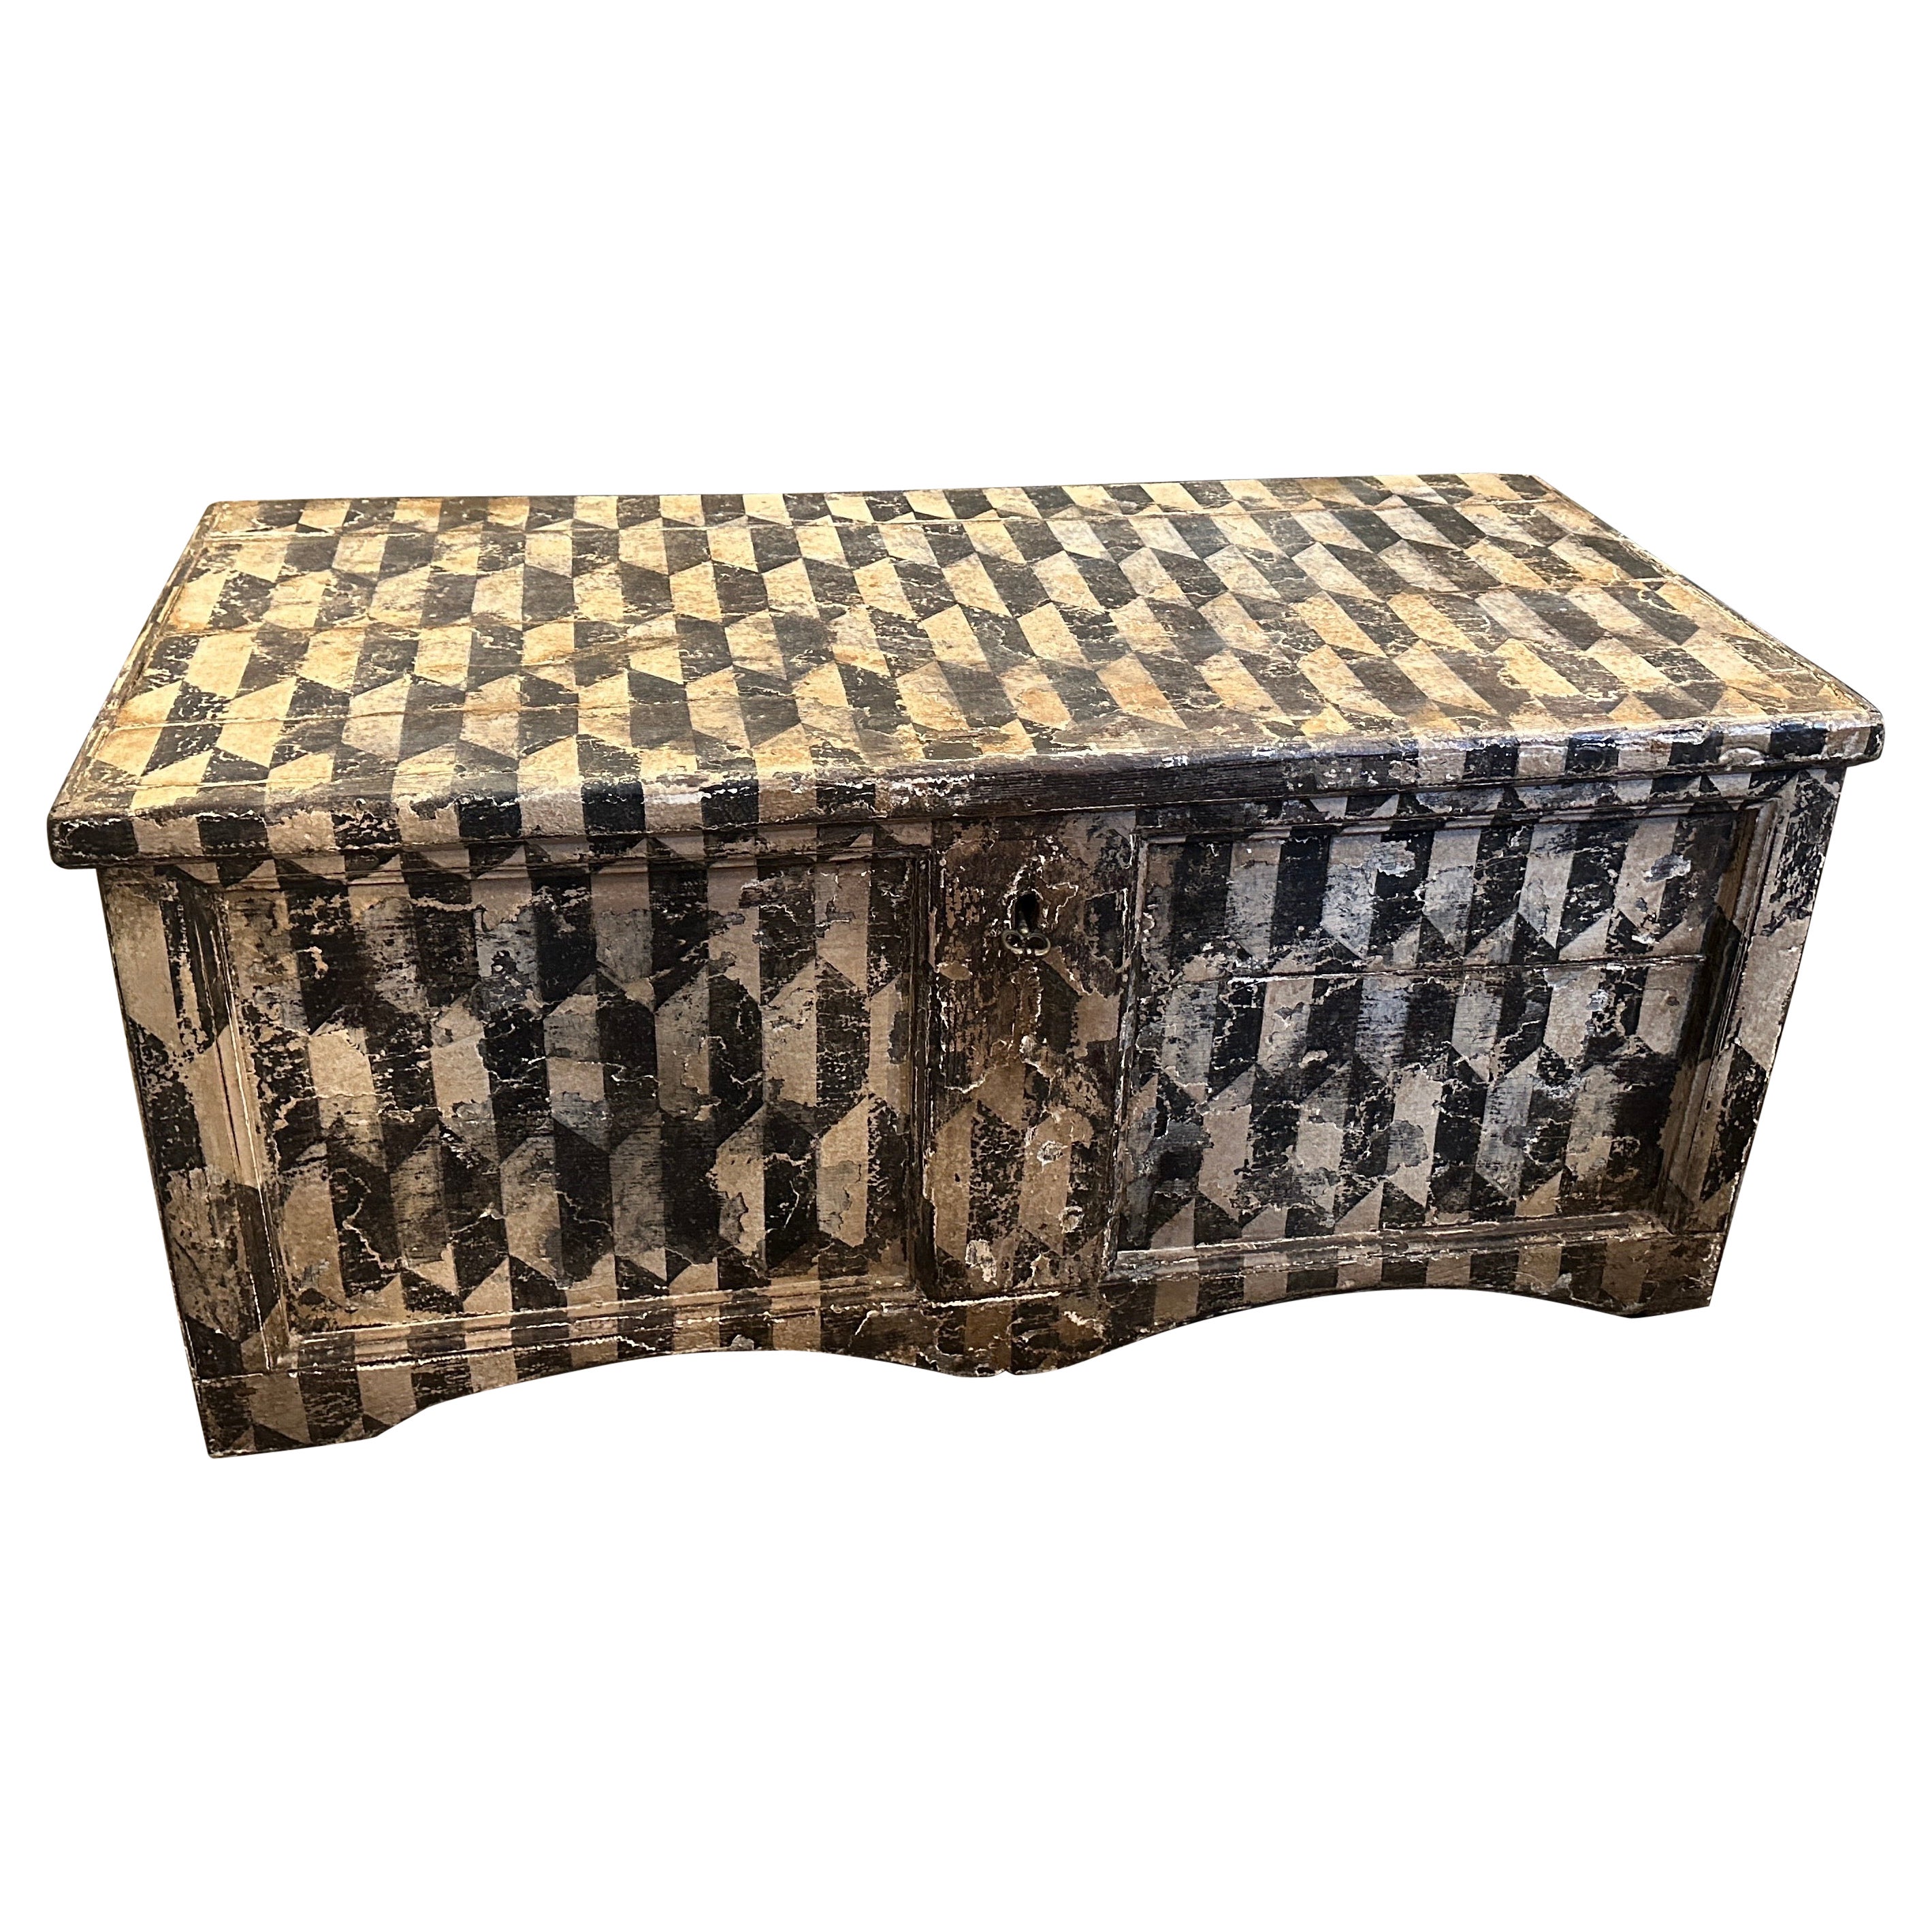 Late 19th Century Black and White Lacquered Wood Florentine Blanket Chest For Sale